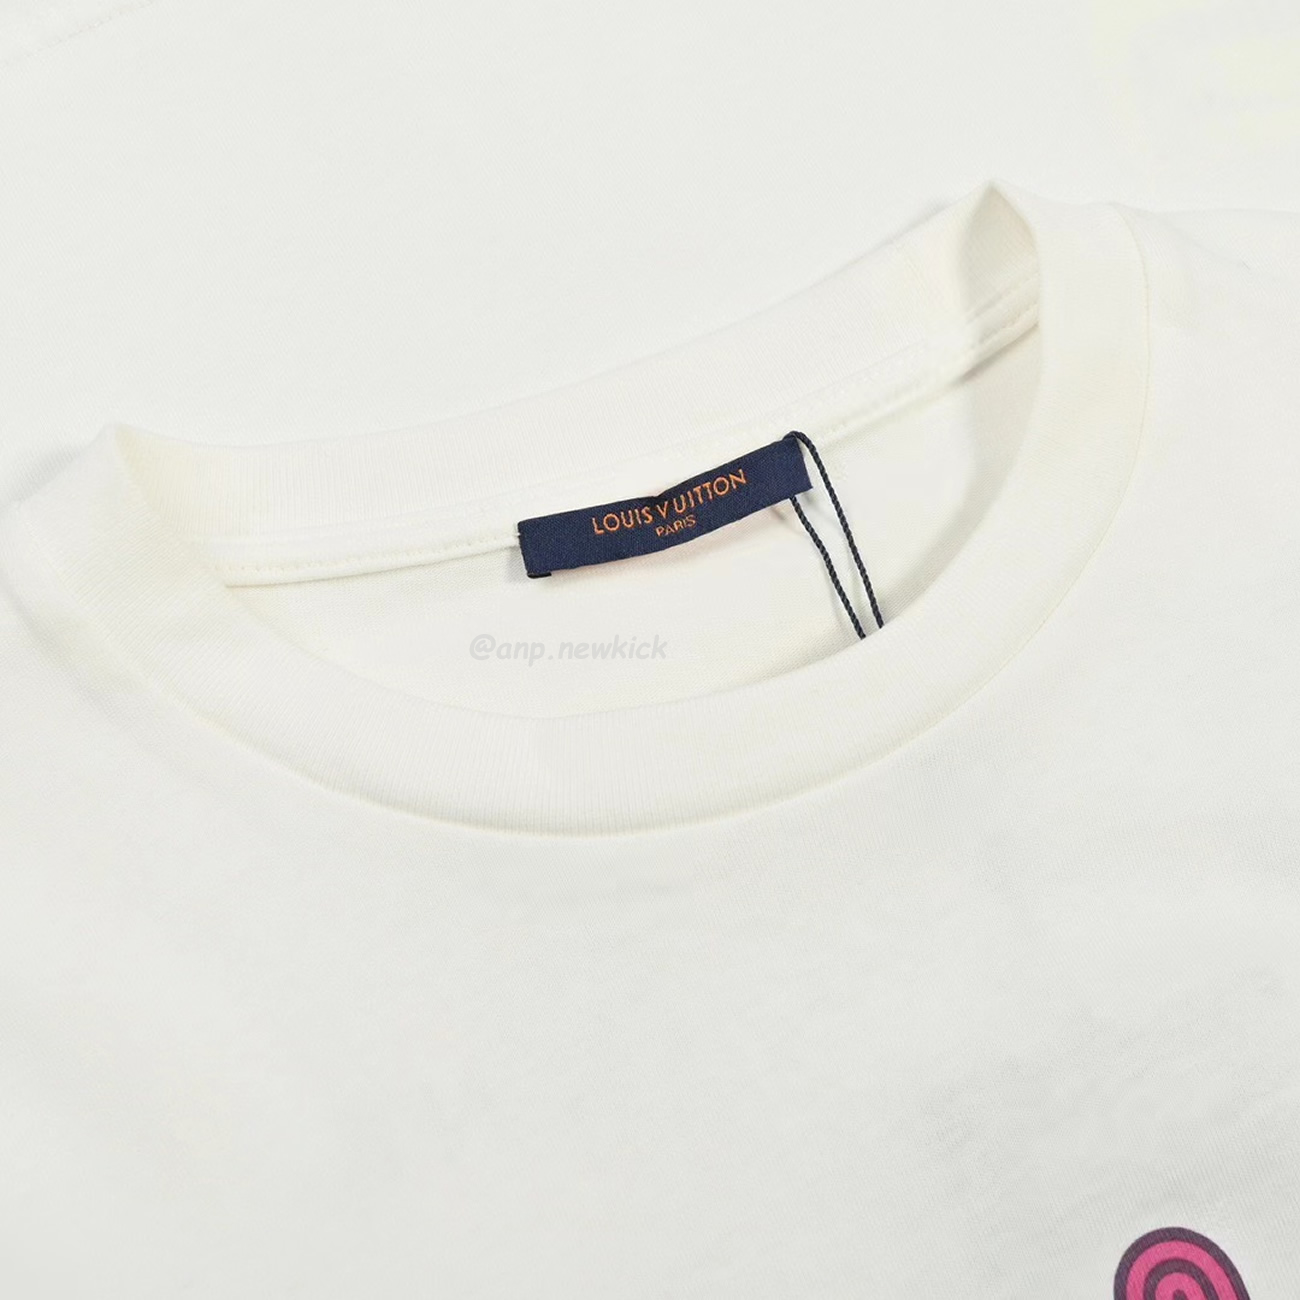 Louis Vuitton Colorful Letter Printed Short Sleeves T Shirt (10) - newkick.org